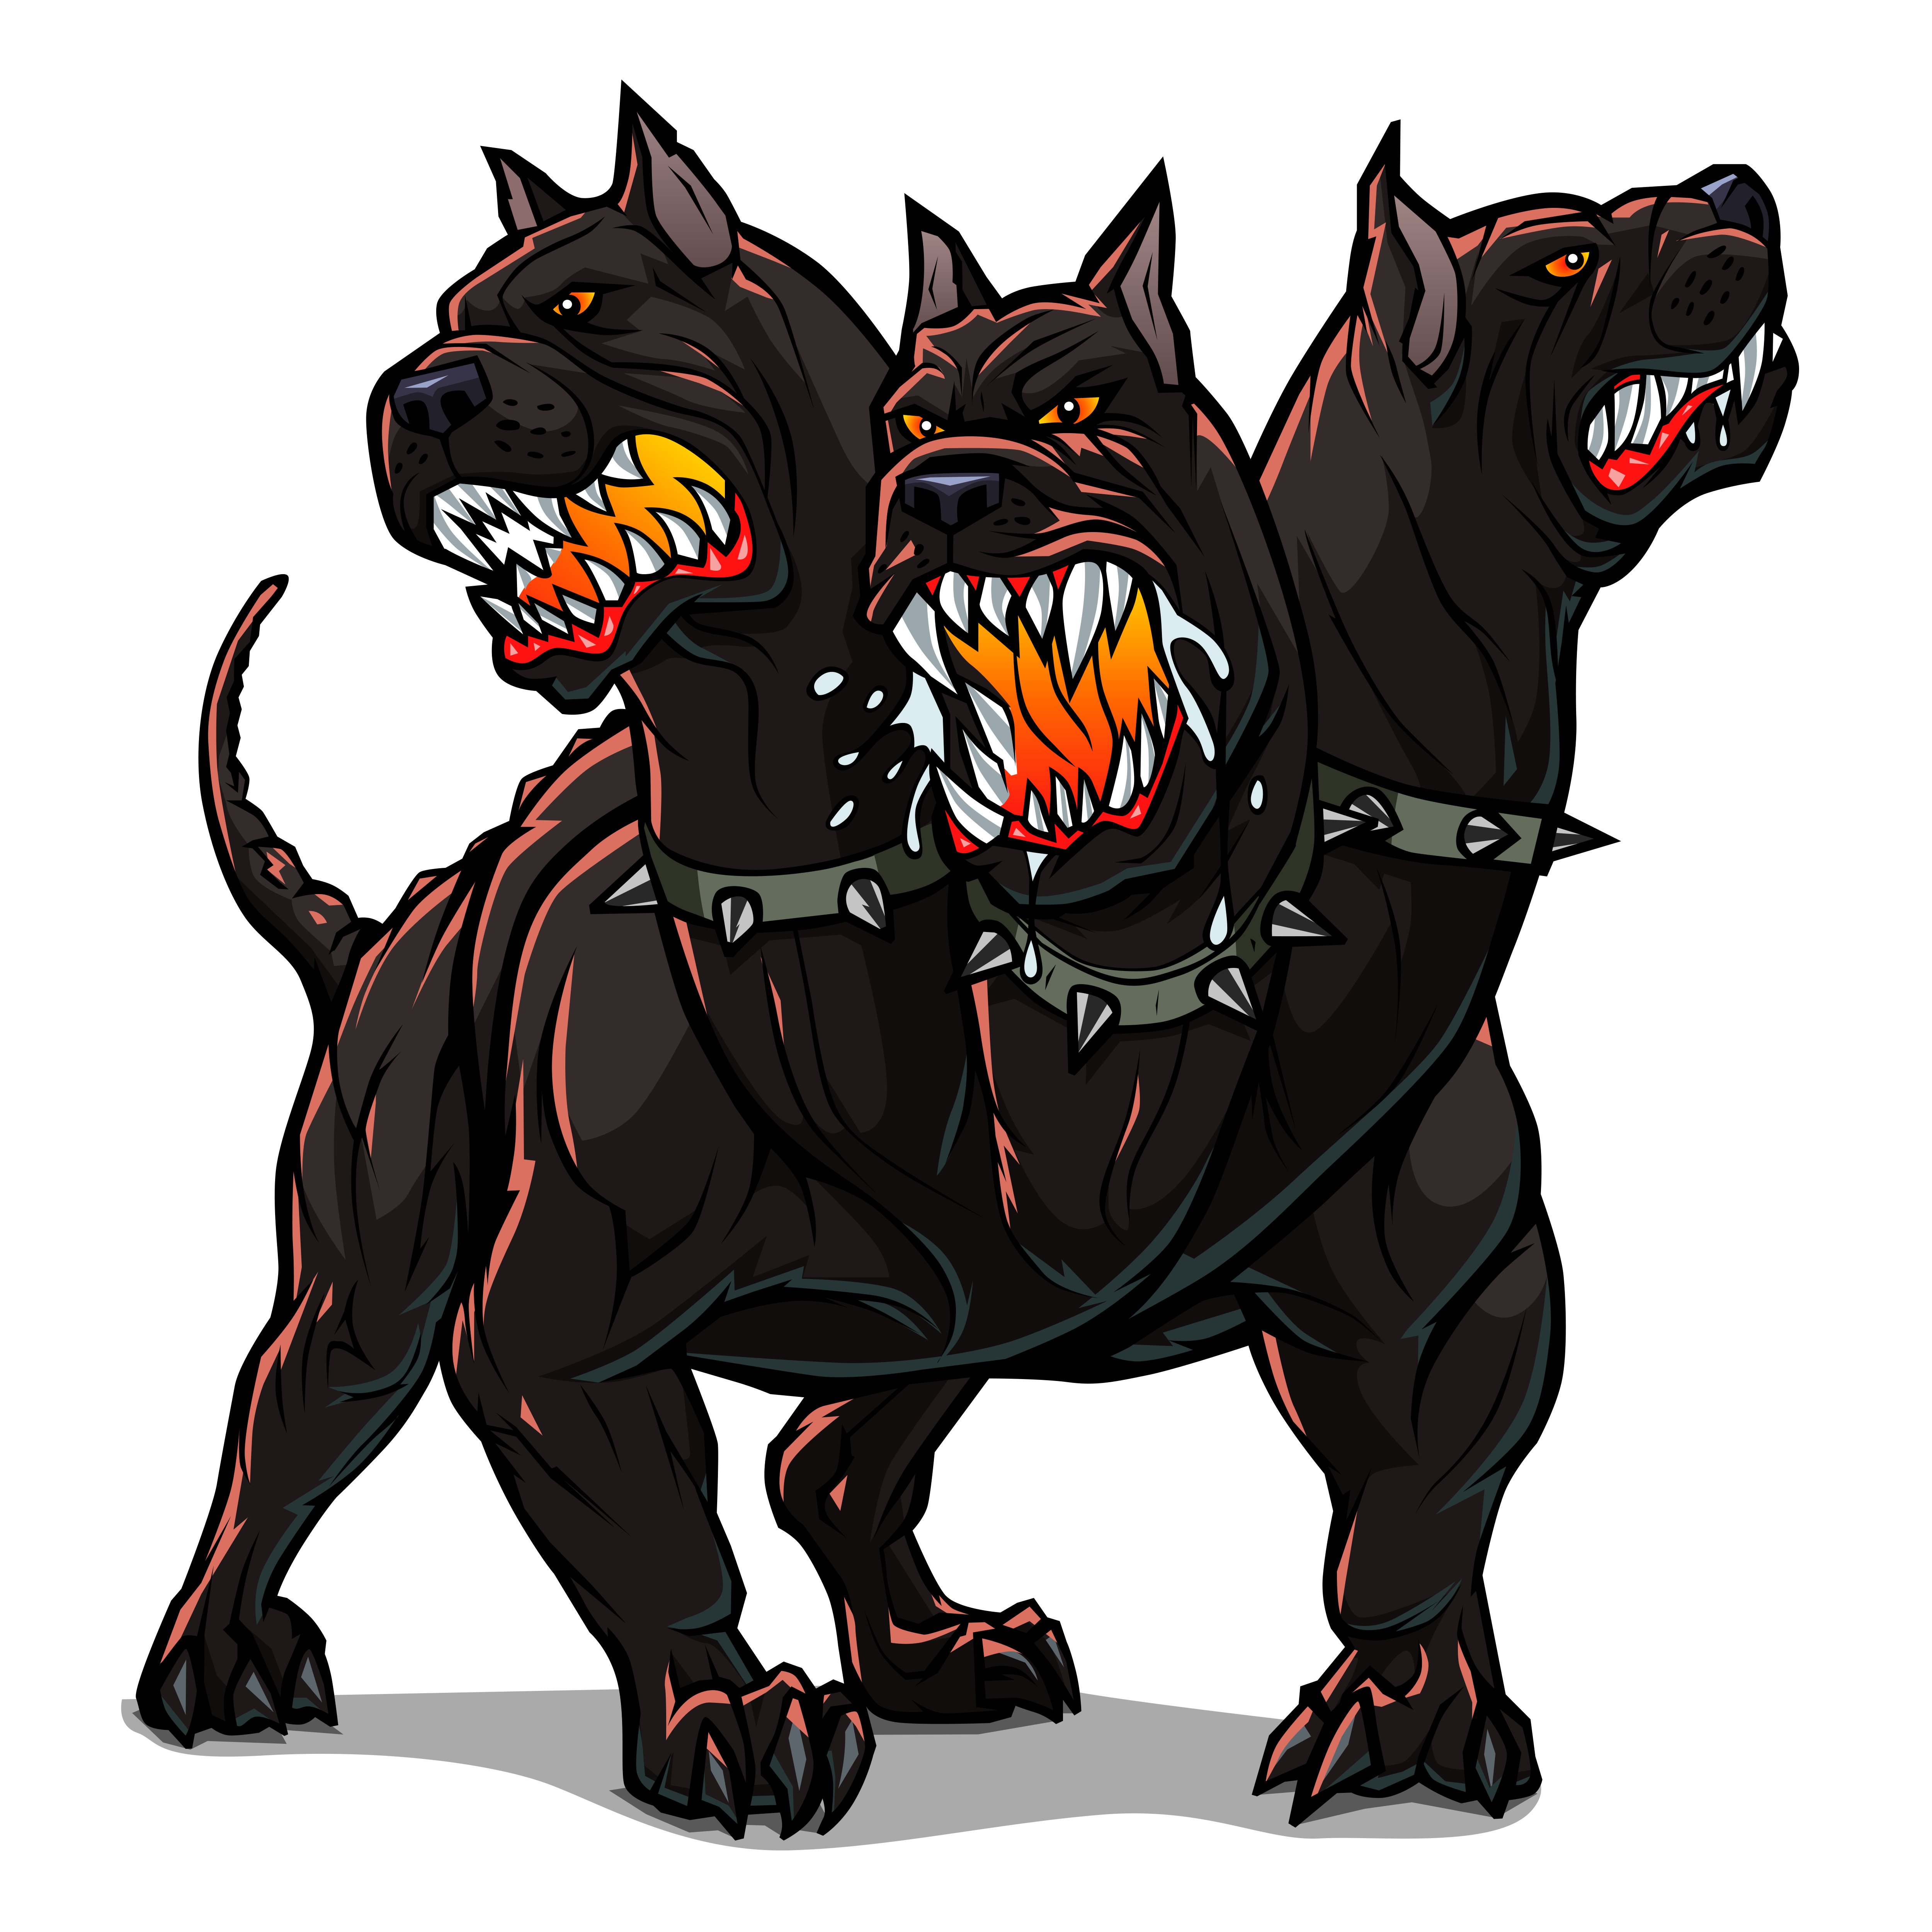 Kerberos three headed dog in color form that formed the purpose of the name of the company